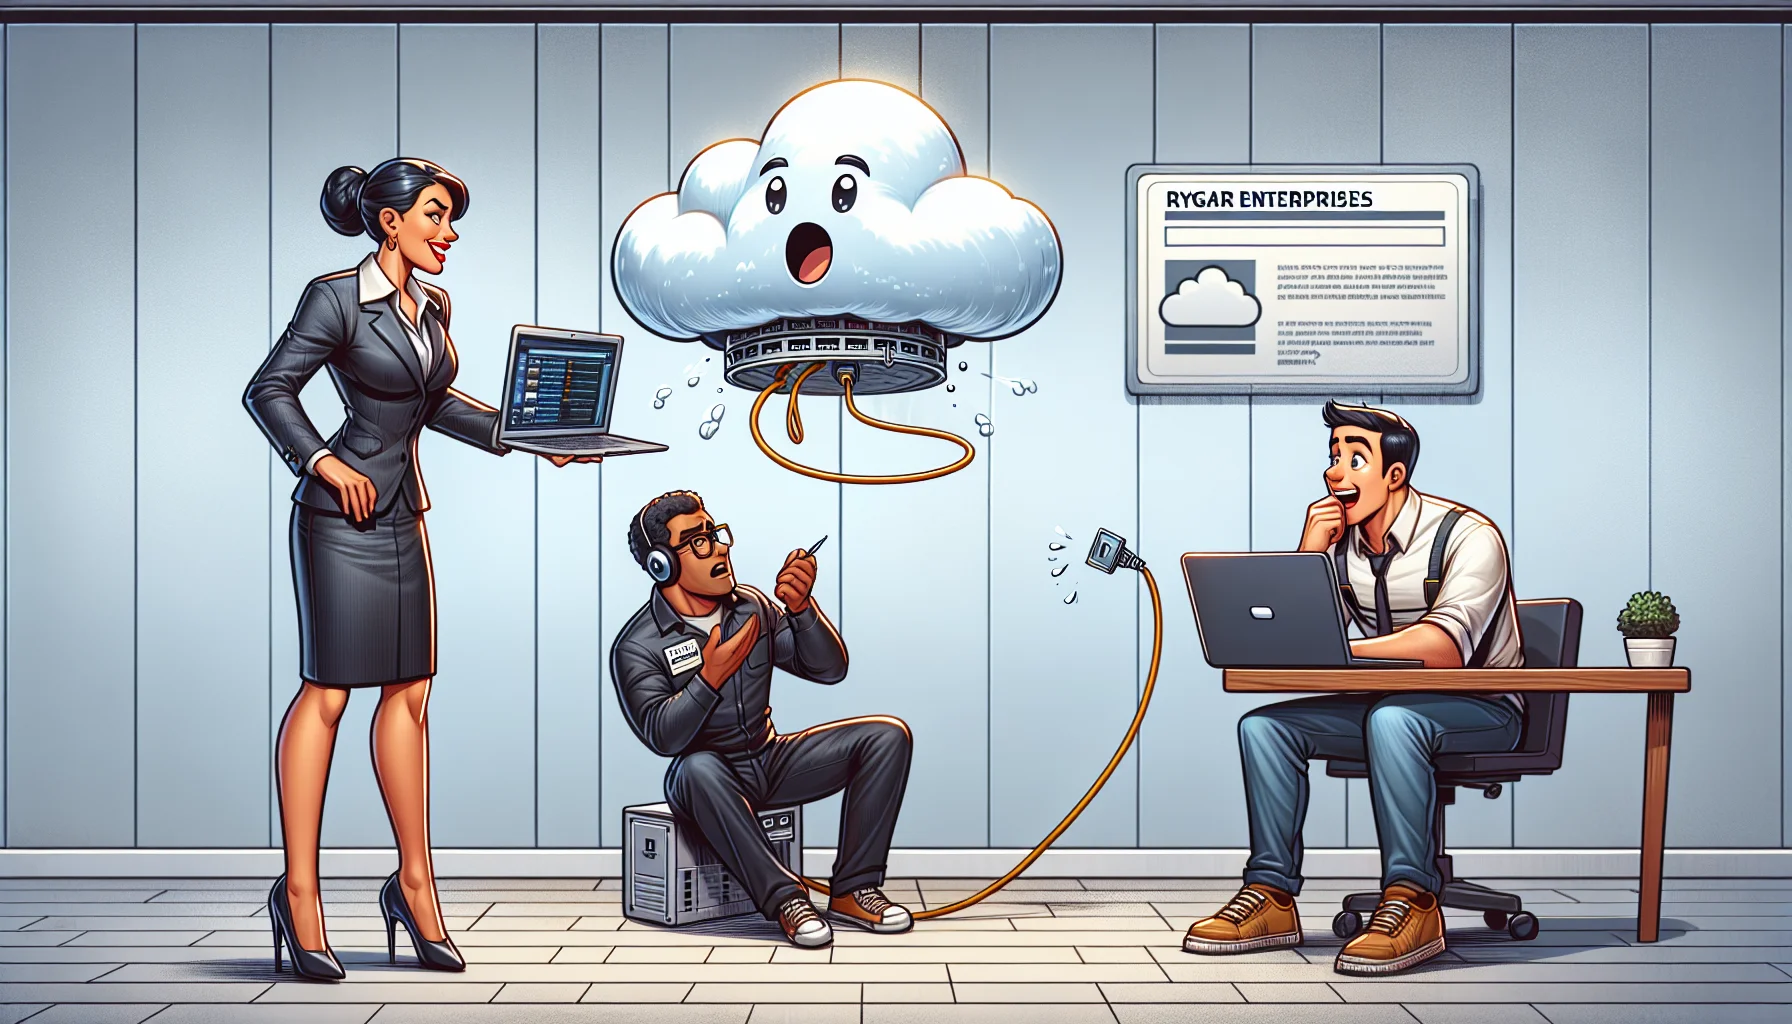 Depict a humorous scenario related to cloud hosting. Show a cartoon image of three characters interacting in an office setting. The first character, a Caucasian woman in a sharp suit, is explaining the benefits of cloud hosting using a large cloud model floating above her hand. The second character, a Black man wearing a technician's outfit, is looking at the cloud in awe, holding a network cable in his hand. The third character, a South Asian man in casual attire, is looking at his laptop screen, surprised as he watches the data transfer at an amazing speed. Include a sign on the wall that reads 'Rygar Enterprises - We make web hosting a breeze.'